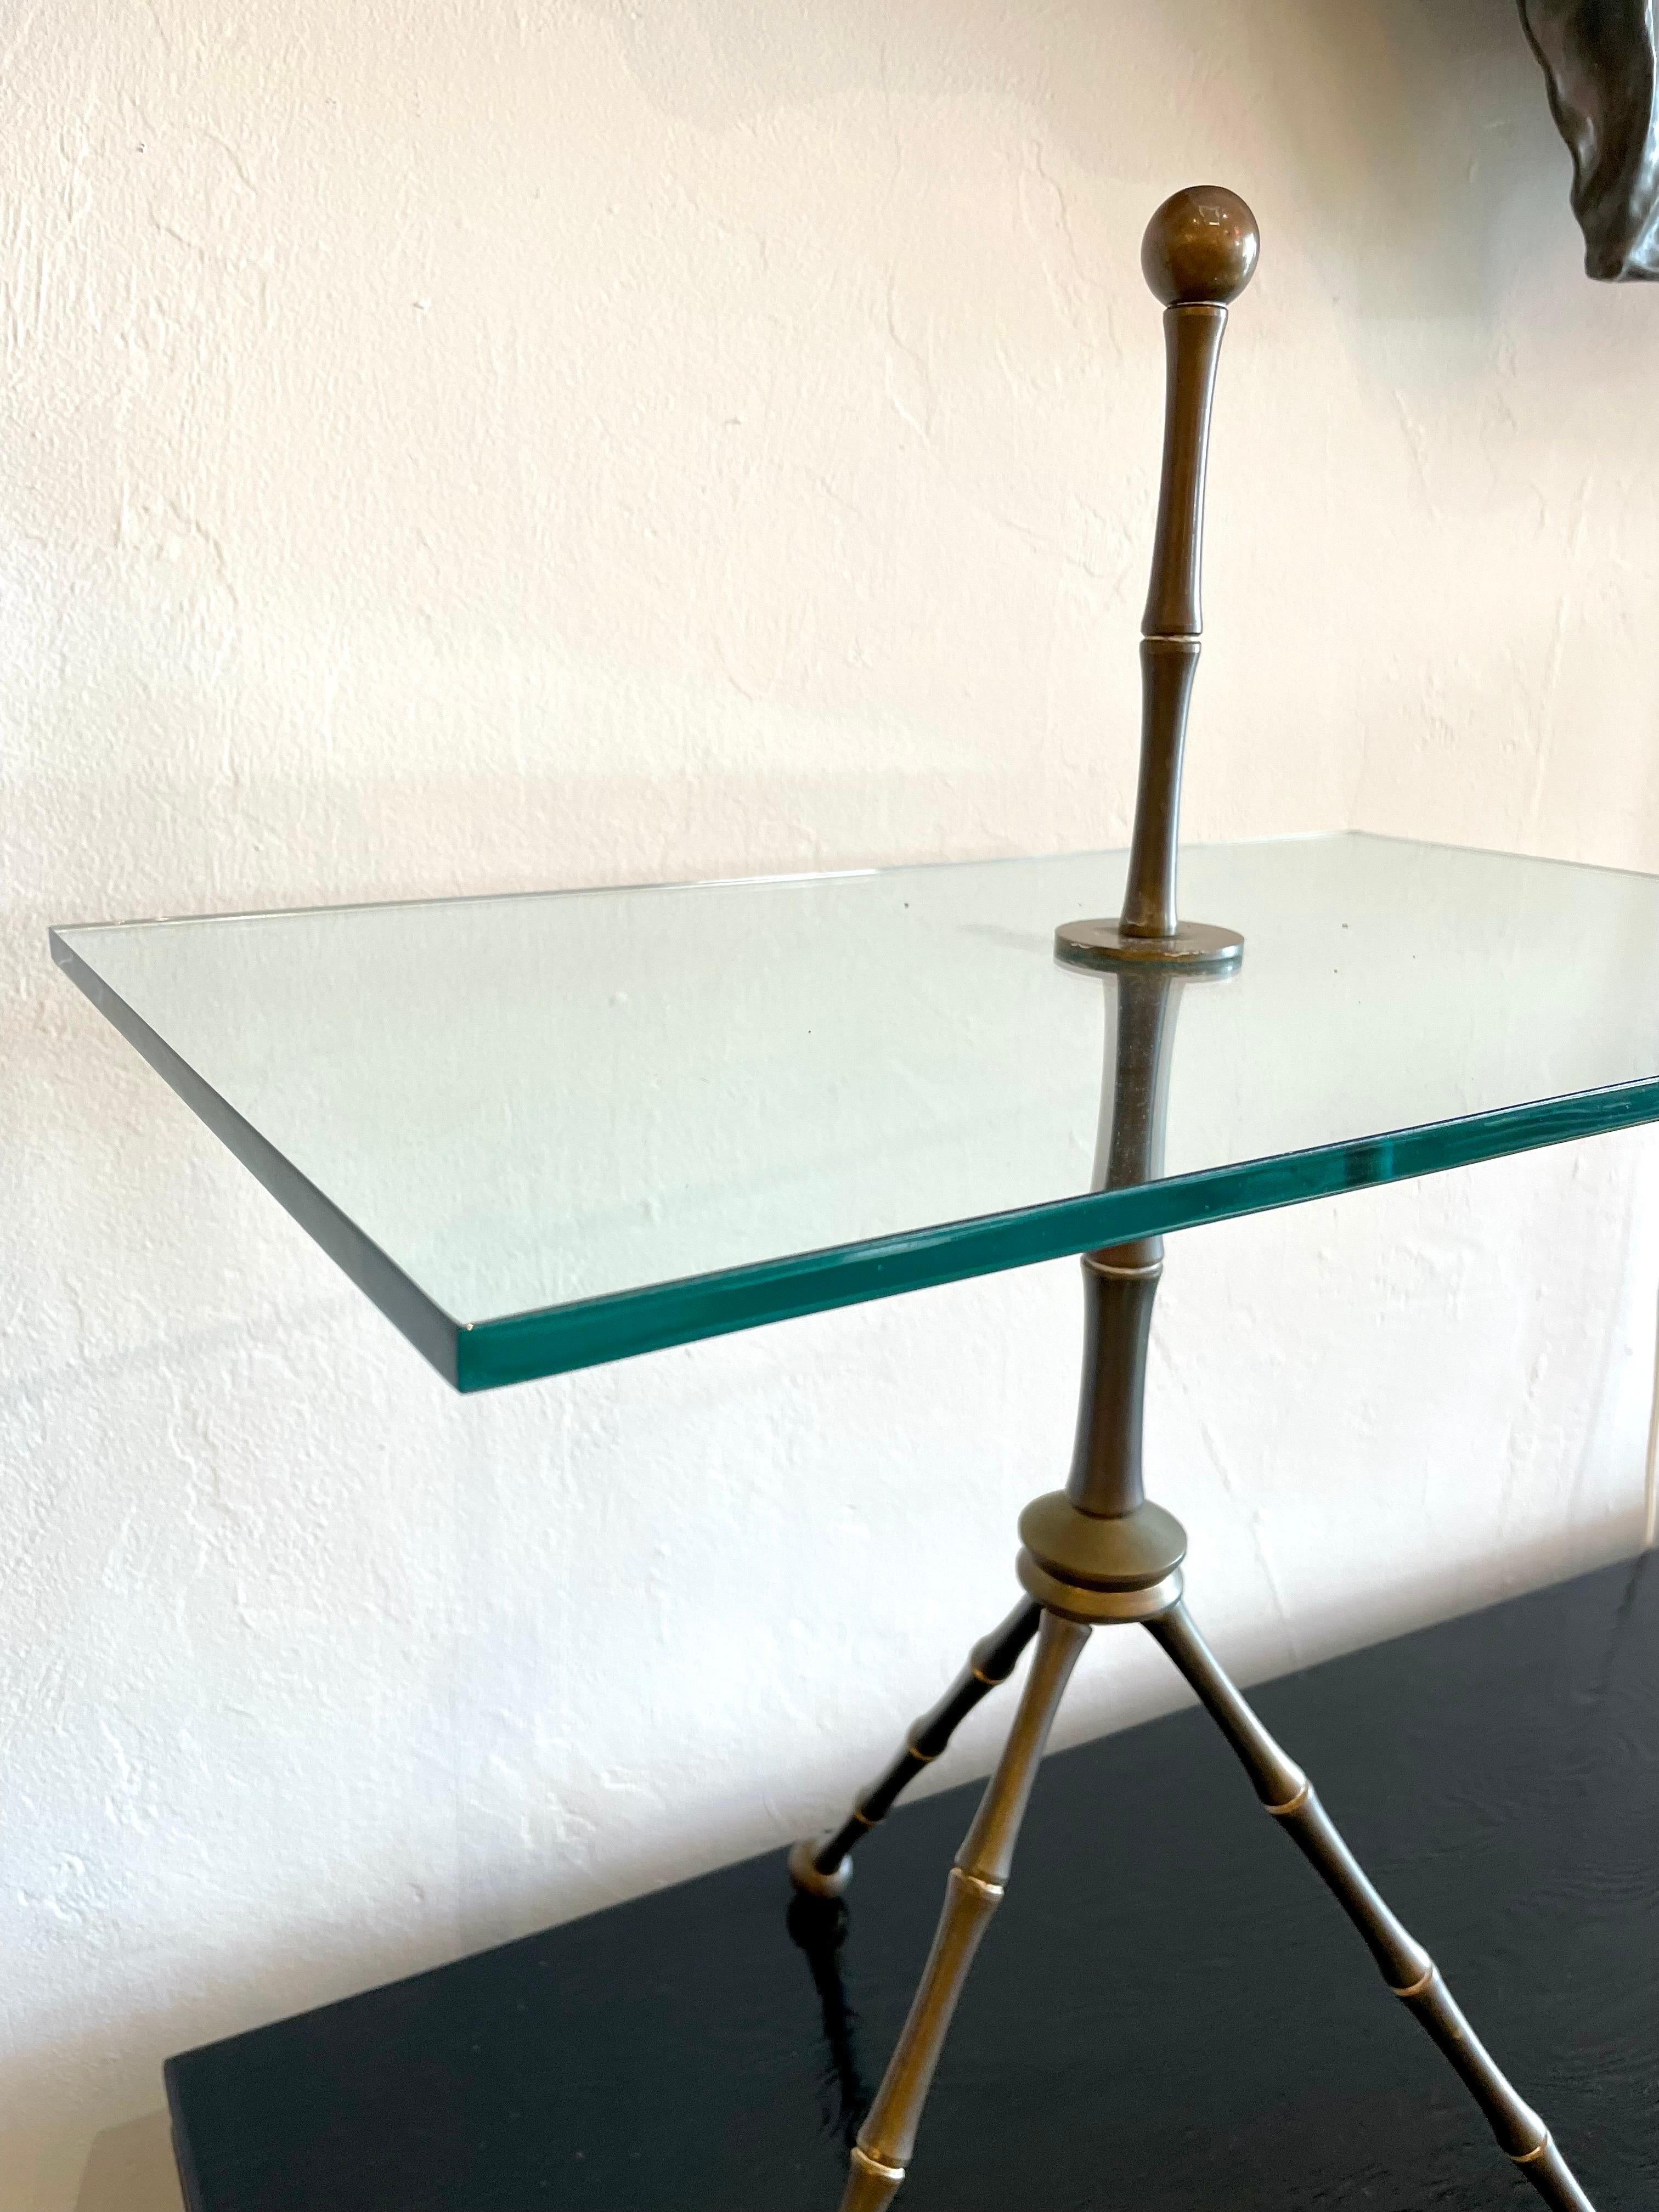 This is a lovely side table in the Jacks style and faux bamboo. The glass is solid and without damages.
Note: Height of the glass plateau is 19 inches from floor.